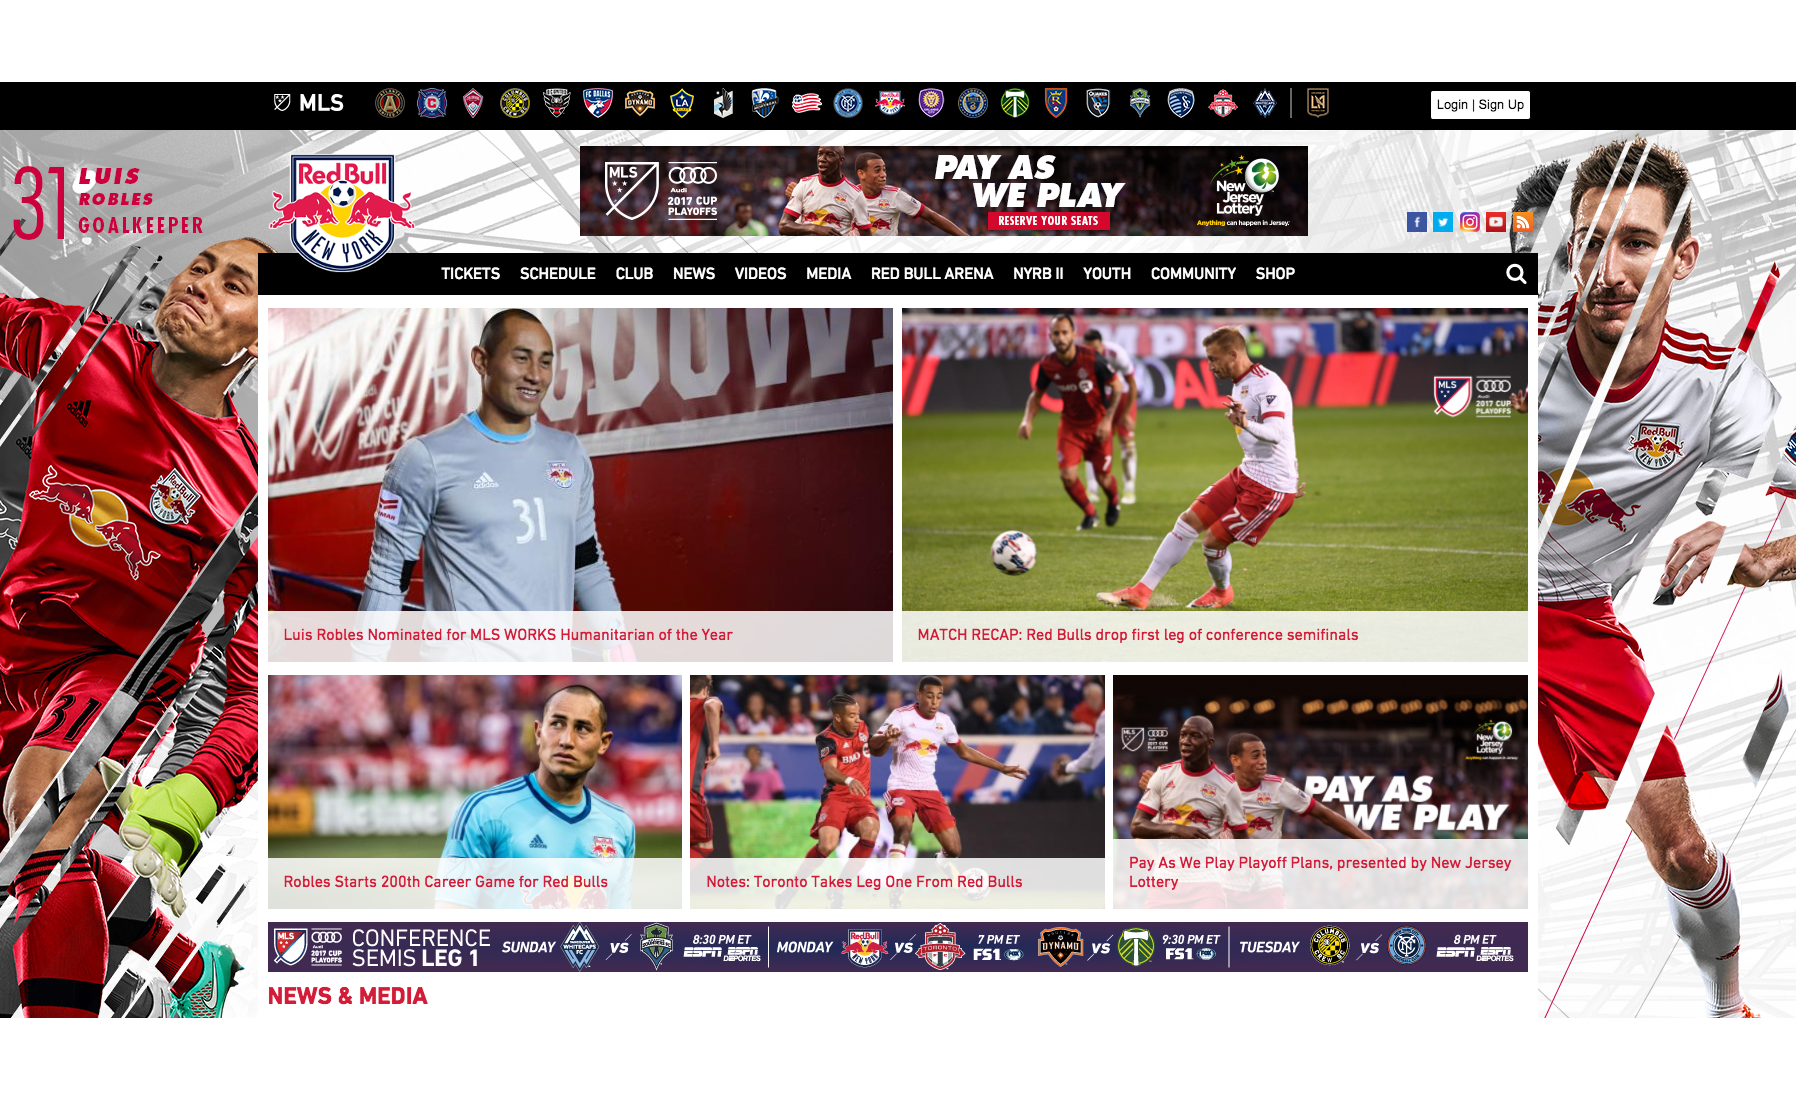 Team Branded Site within MLS